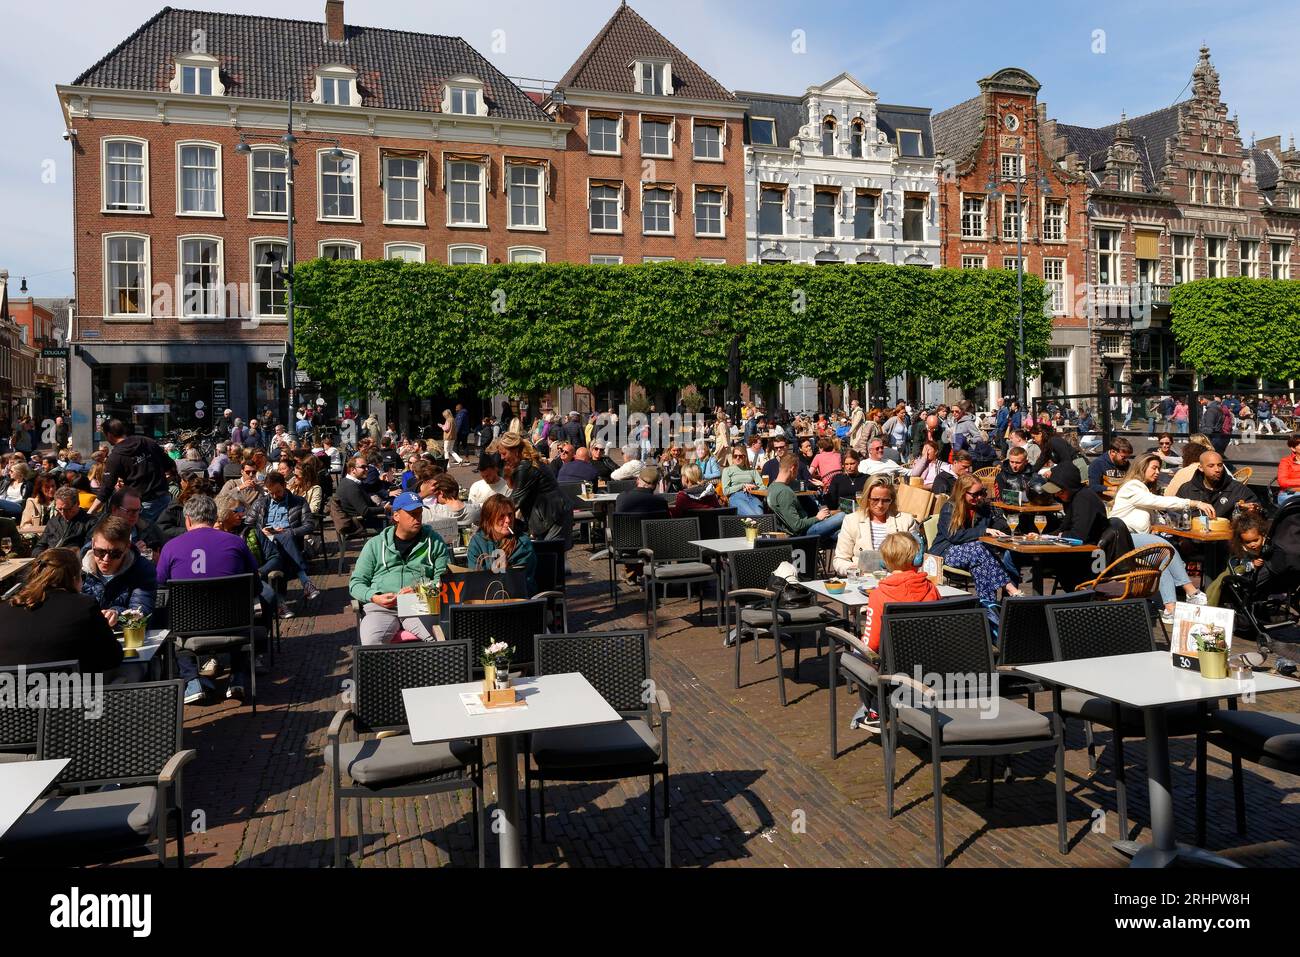 View of the Grote Markt in the old town of Haarlem, Haarlem, North Holland, Noord-Holland, Benelux, Benelux countries, Netherlands Stock Photo